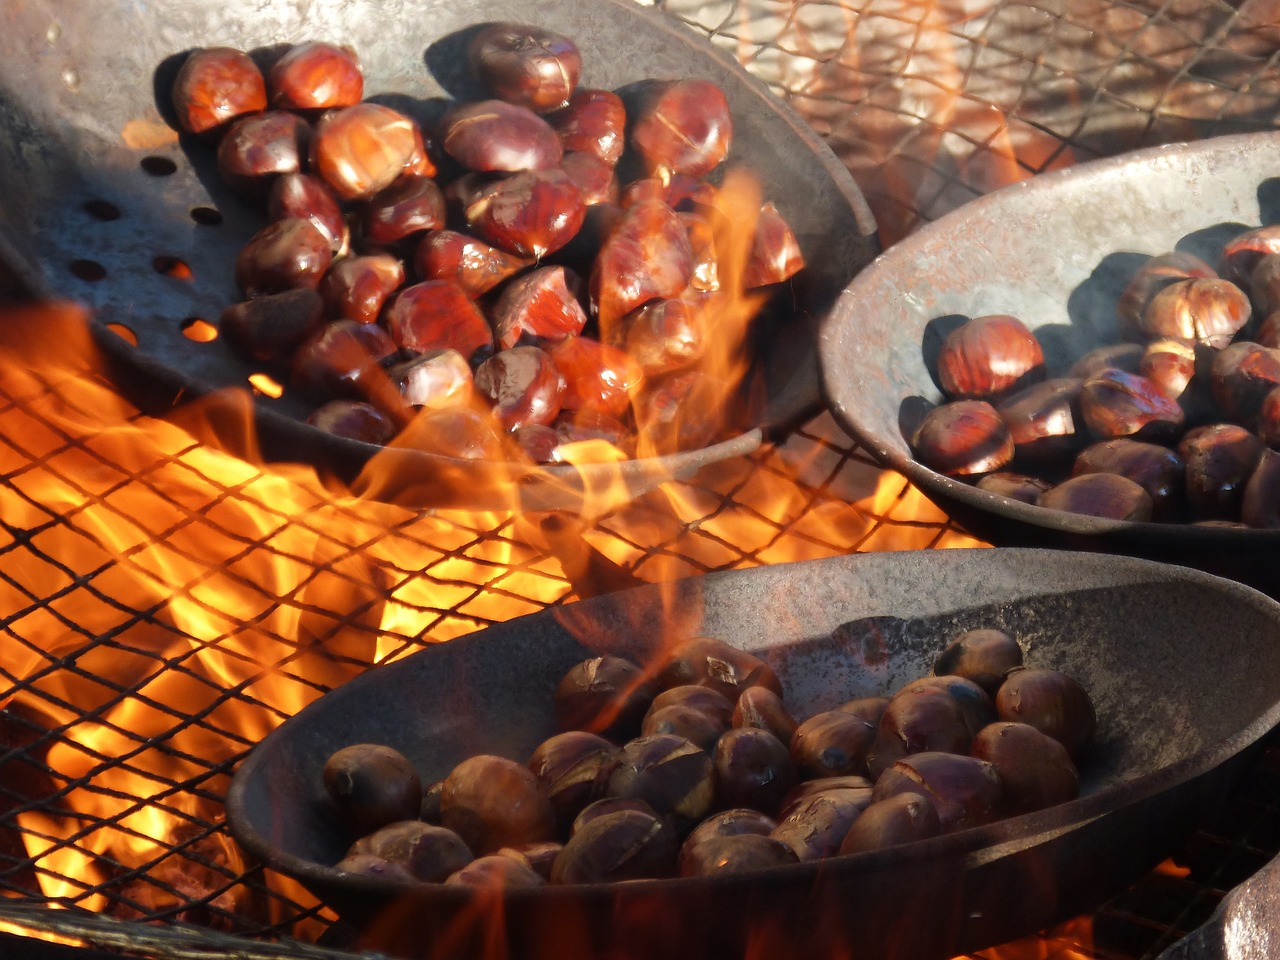 chestnuts, fire, roasted chestnuts-1783878.jpg